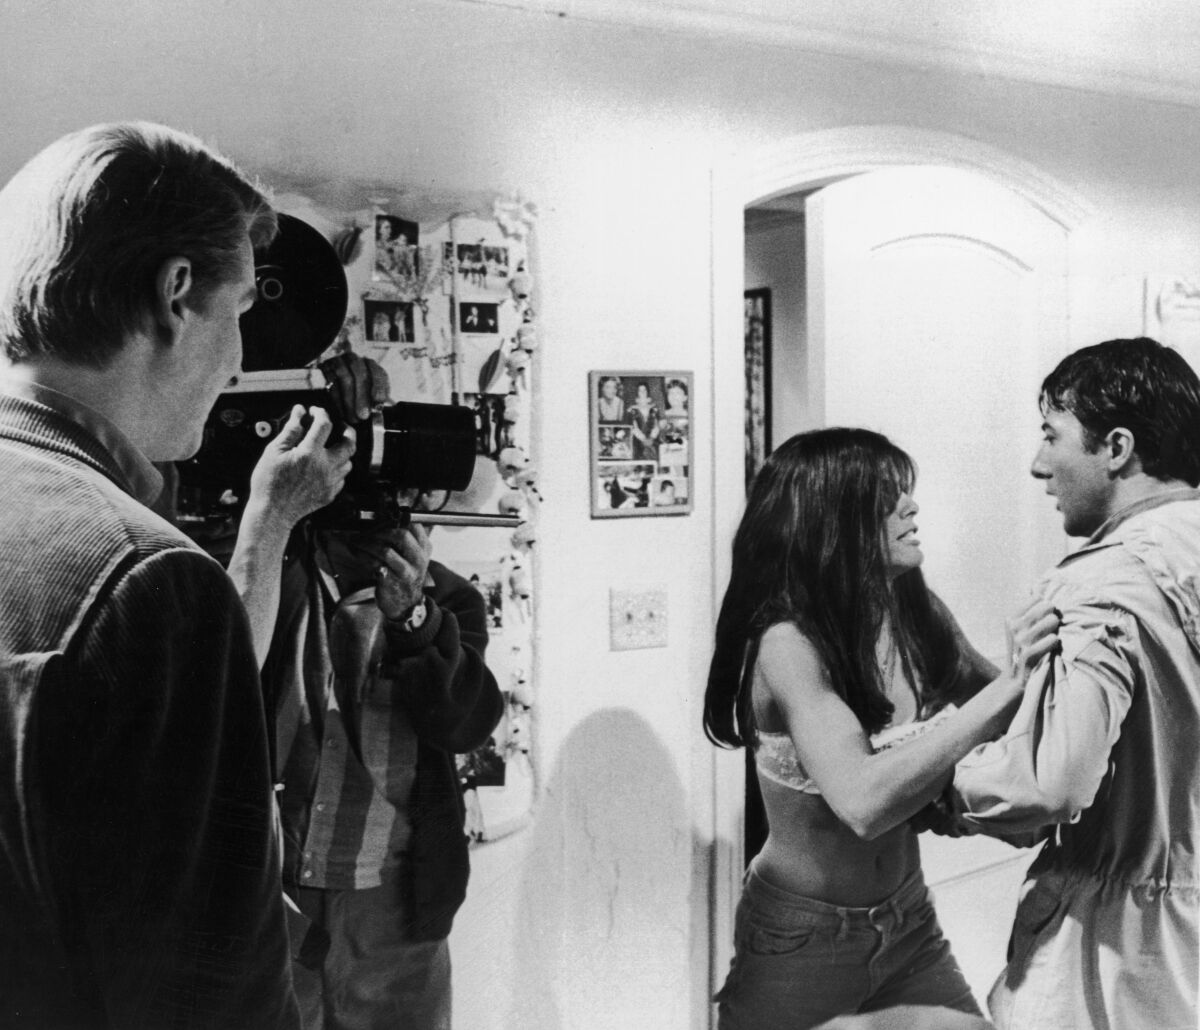 Mike Nichols directs Katharine Ross and Dustin Hoffman as a cameraman films a scene of "The Graduate" in a room.